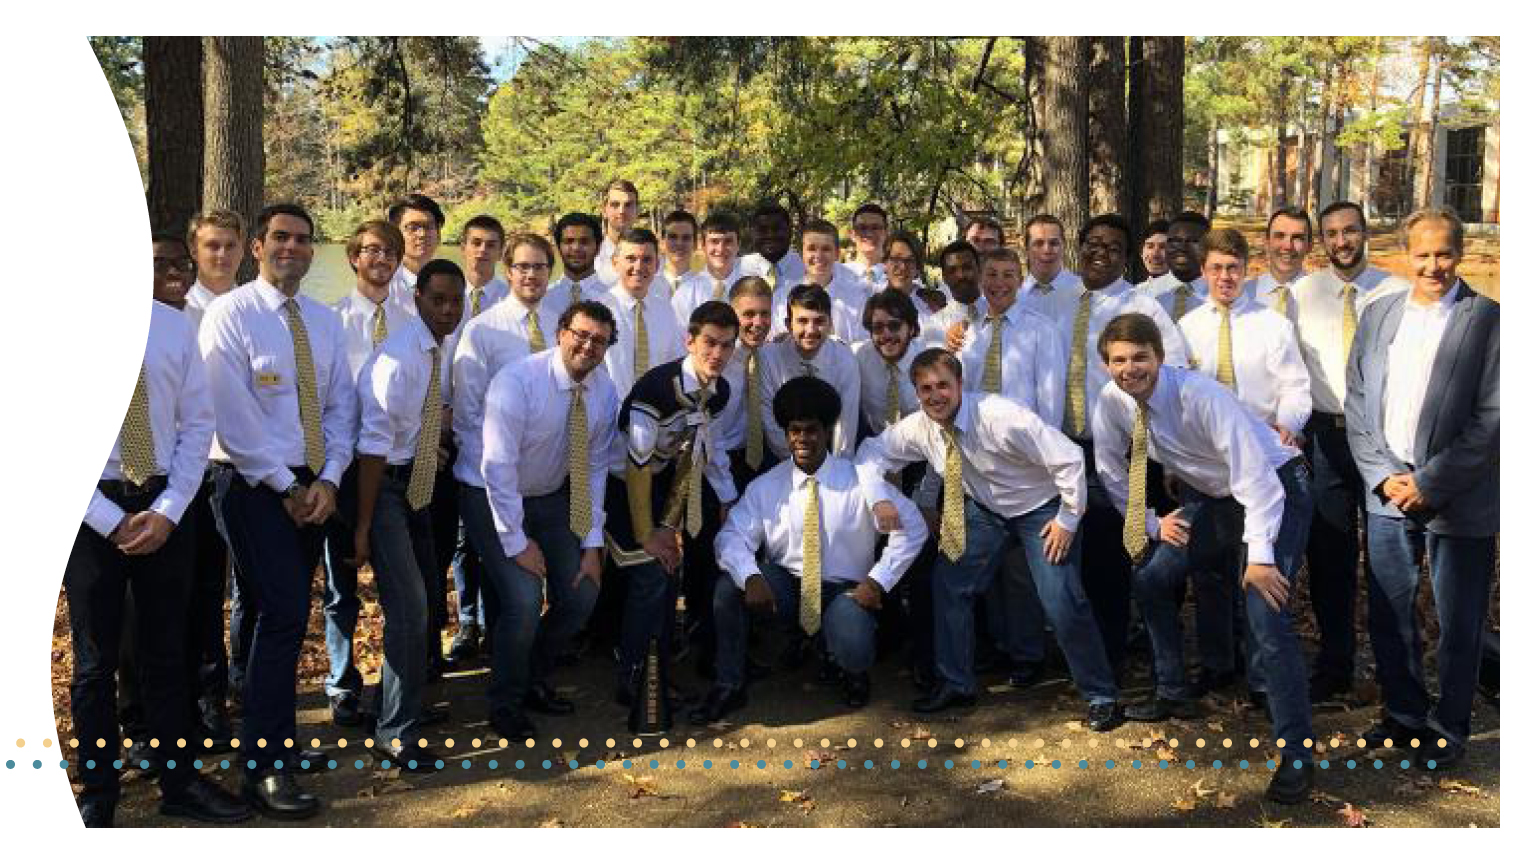 The Georgia Tech Glee Club standing in a group outside.